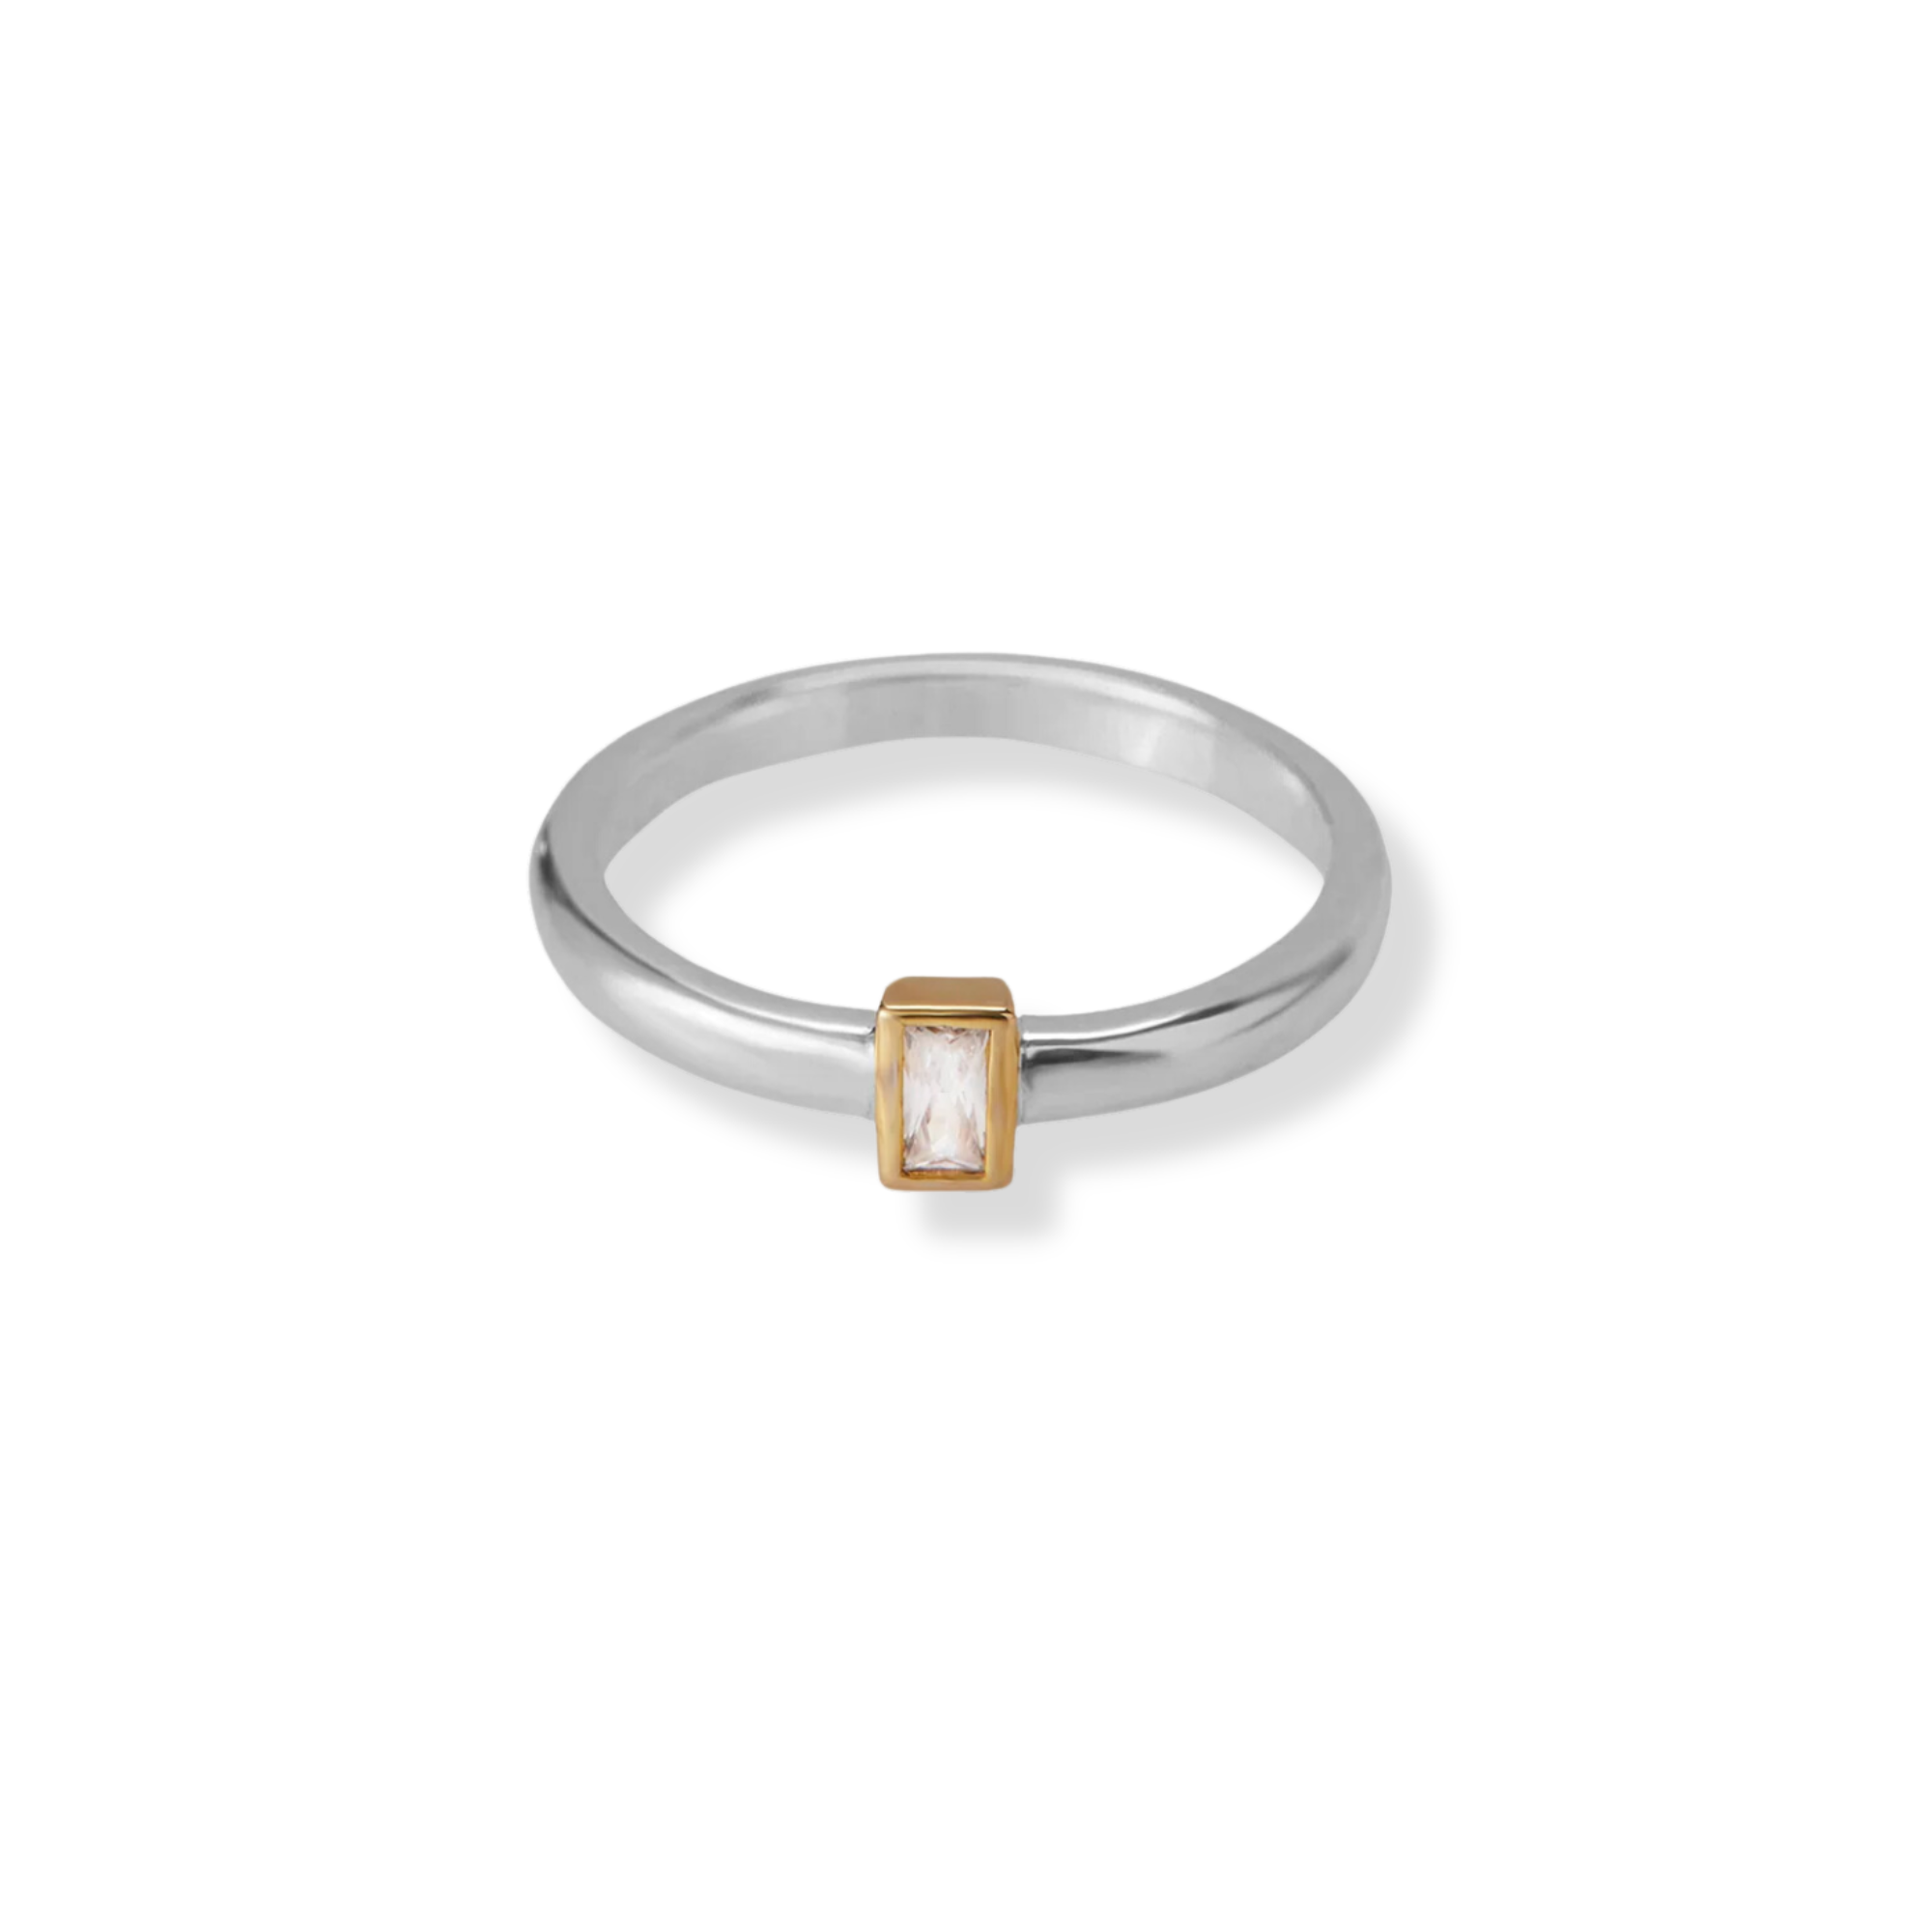 THE TWO TONE BAGUETTE RING